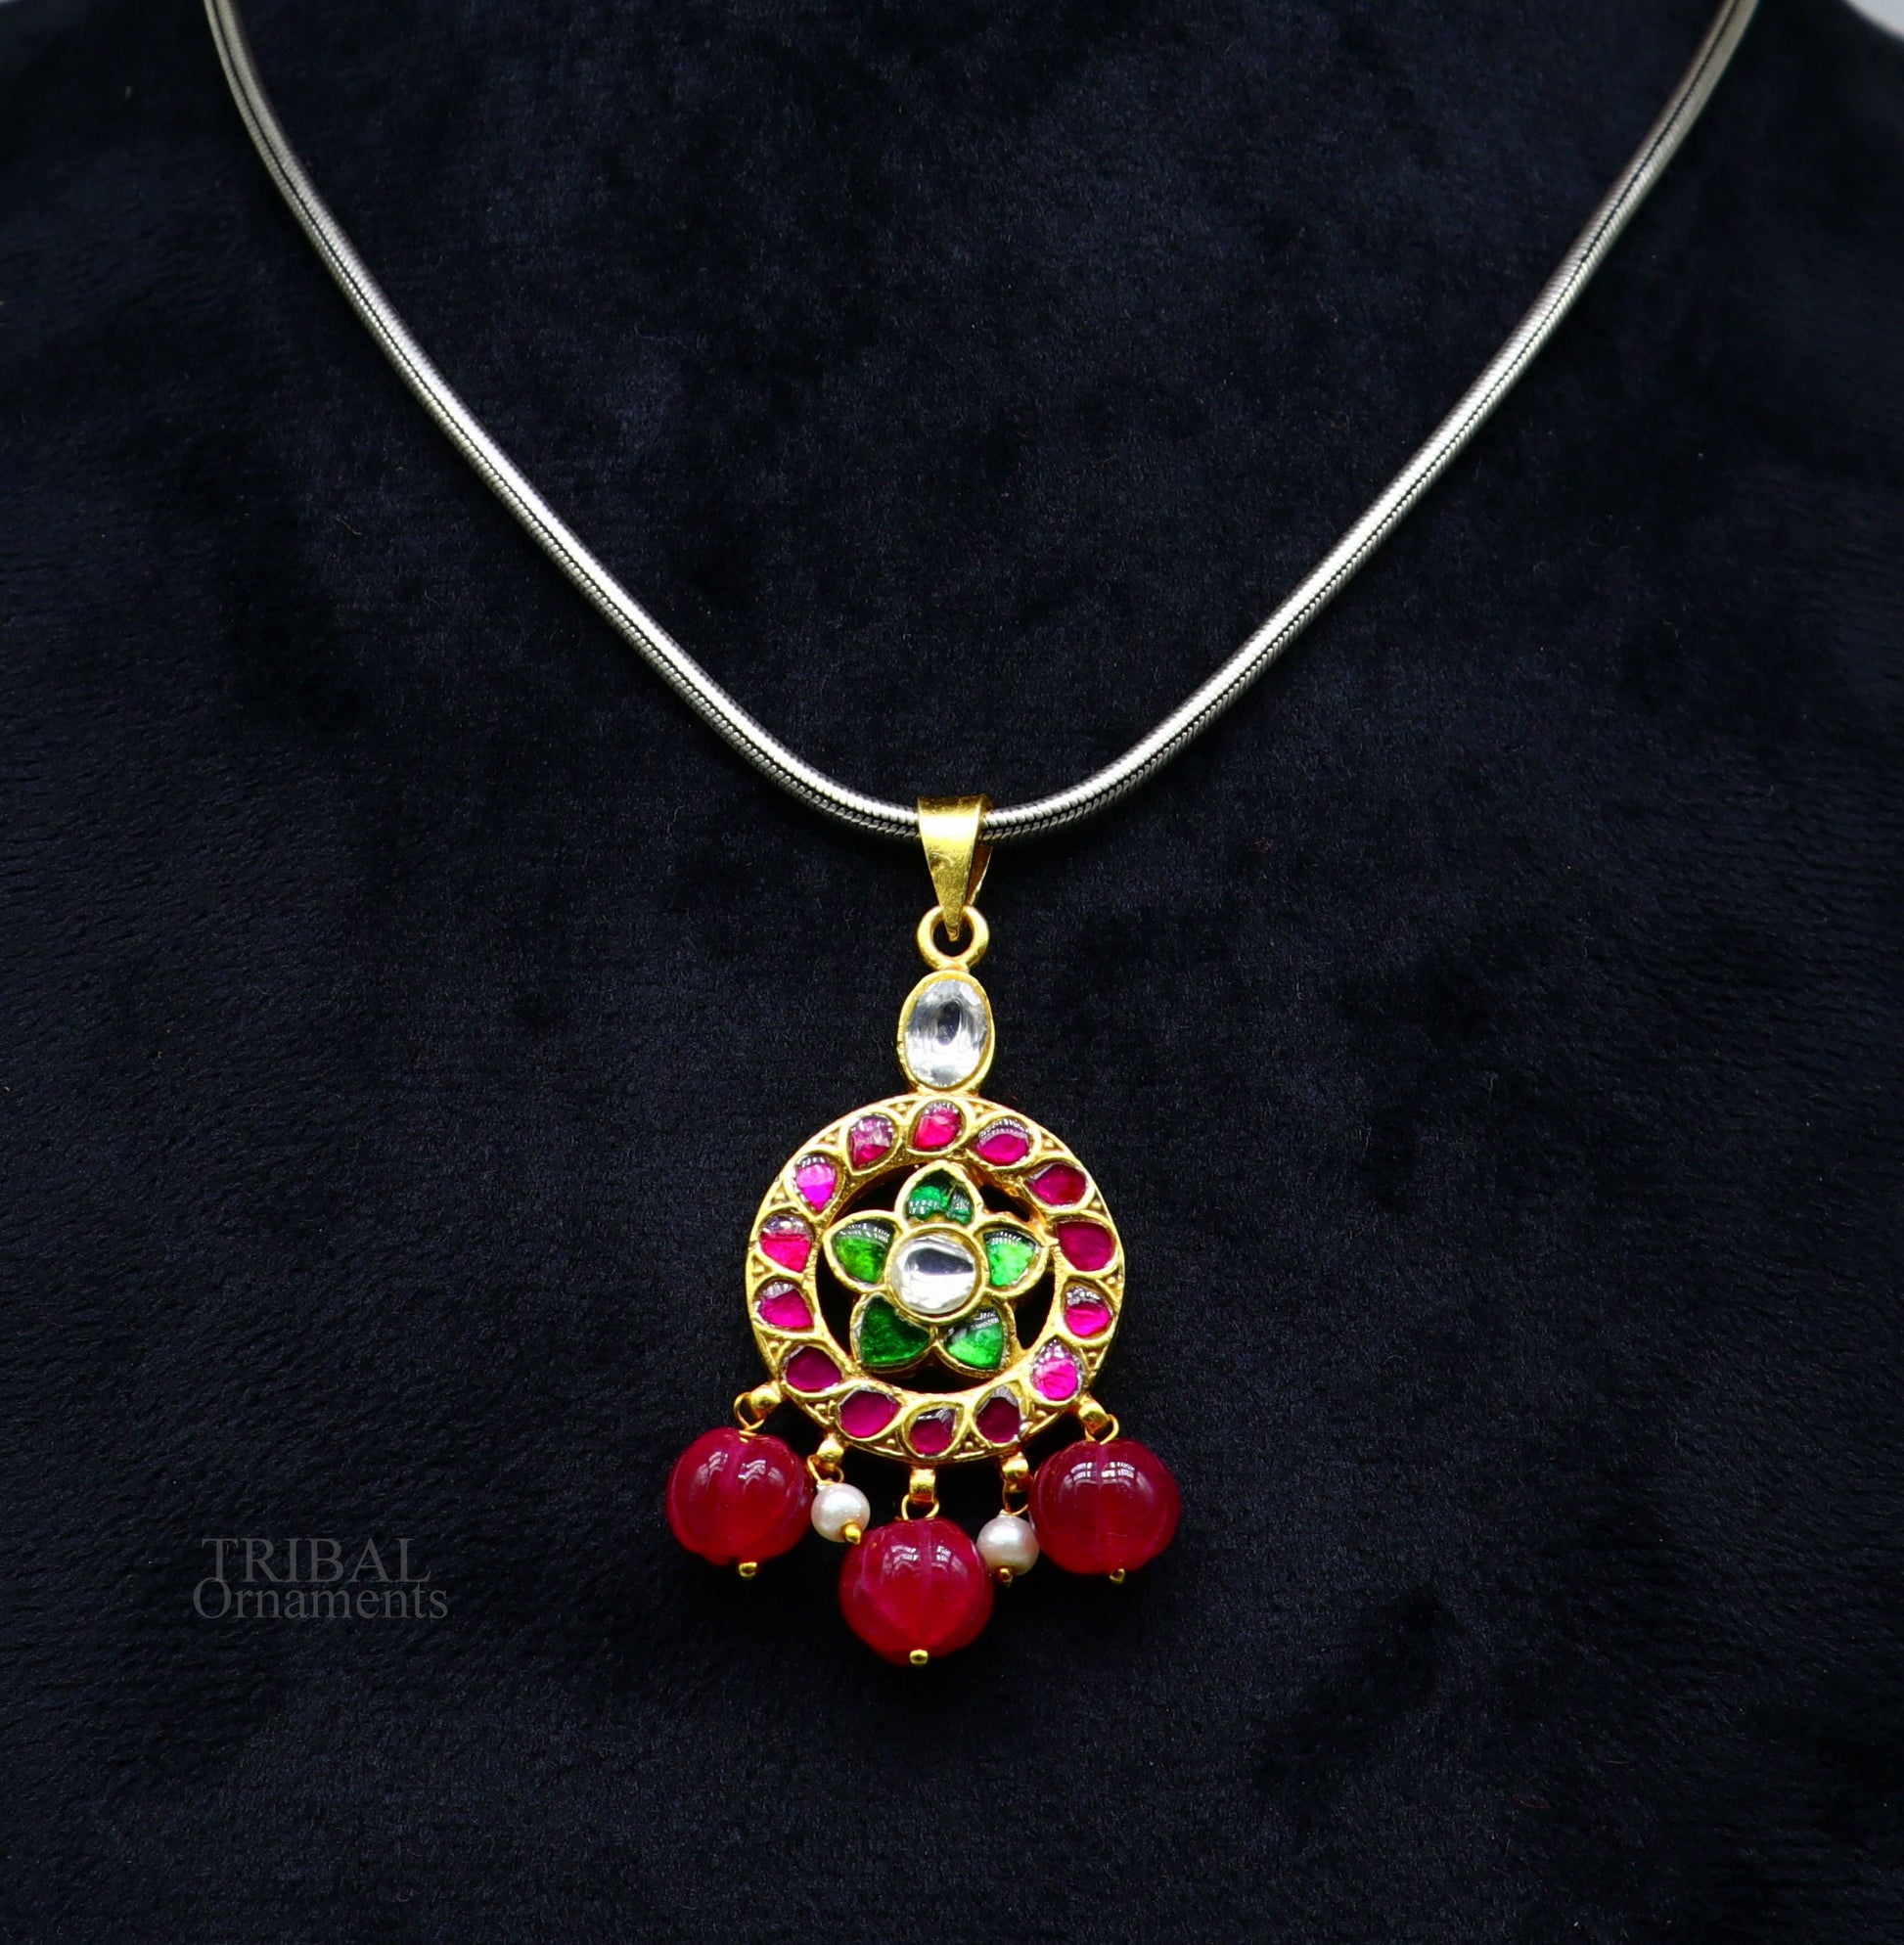 Exclusive gold polished or plated over 925 sterling silver pendant, amazing stylish red green stone and hanging pearl pendant nsp452 - TRIBAL ORNAMENTS